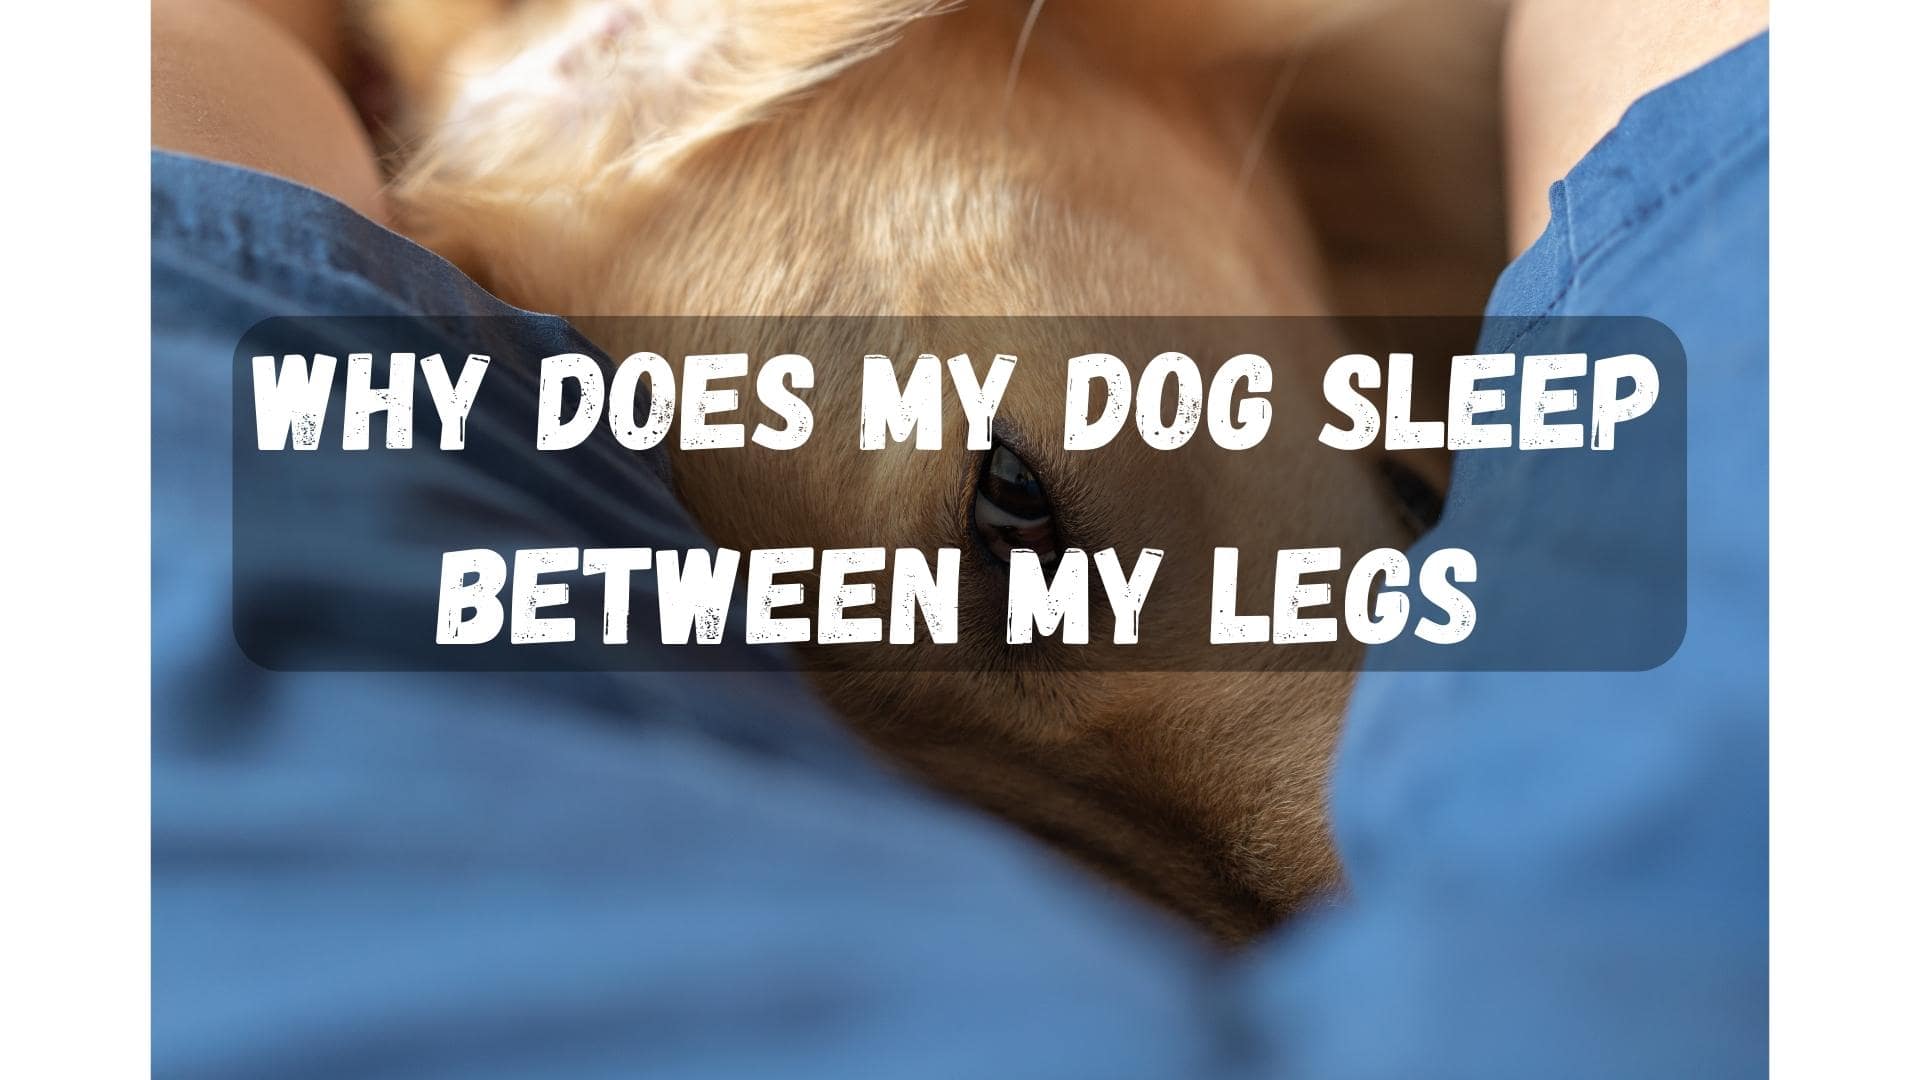 Why Does My Dog Sleep Between My Legs? (Fully Explained!)